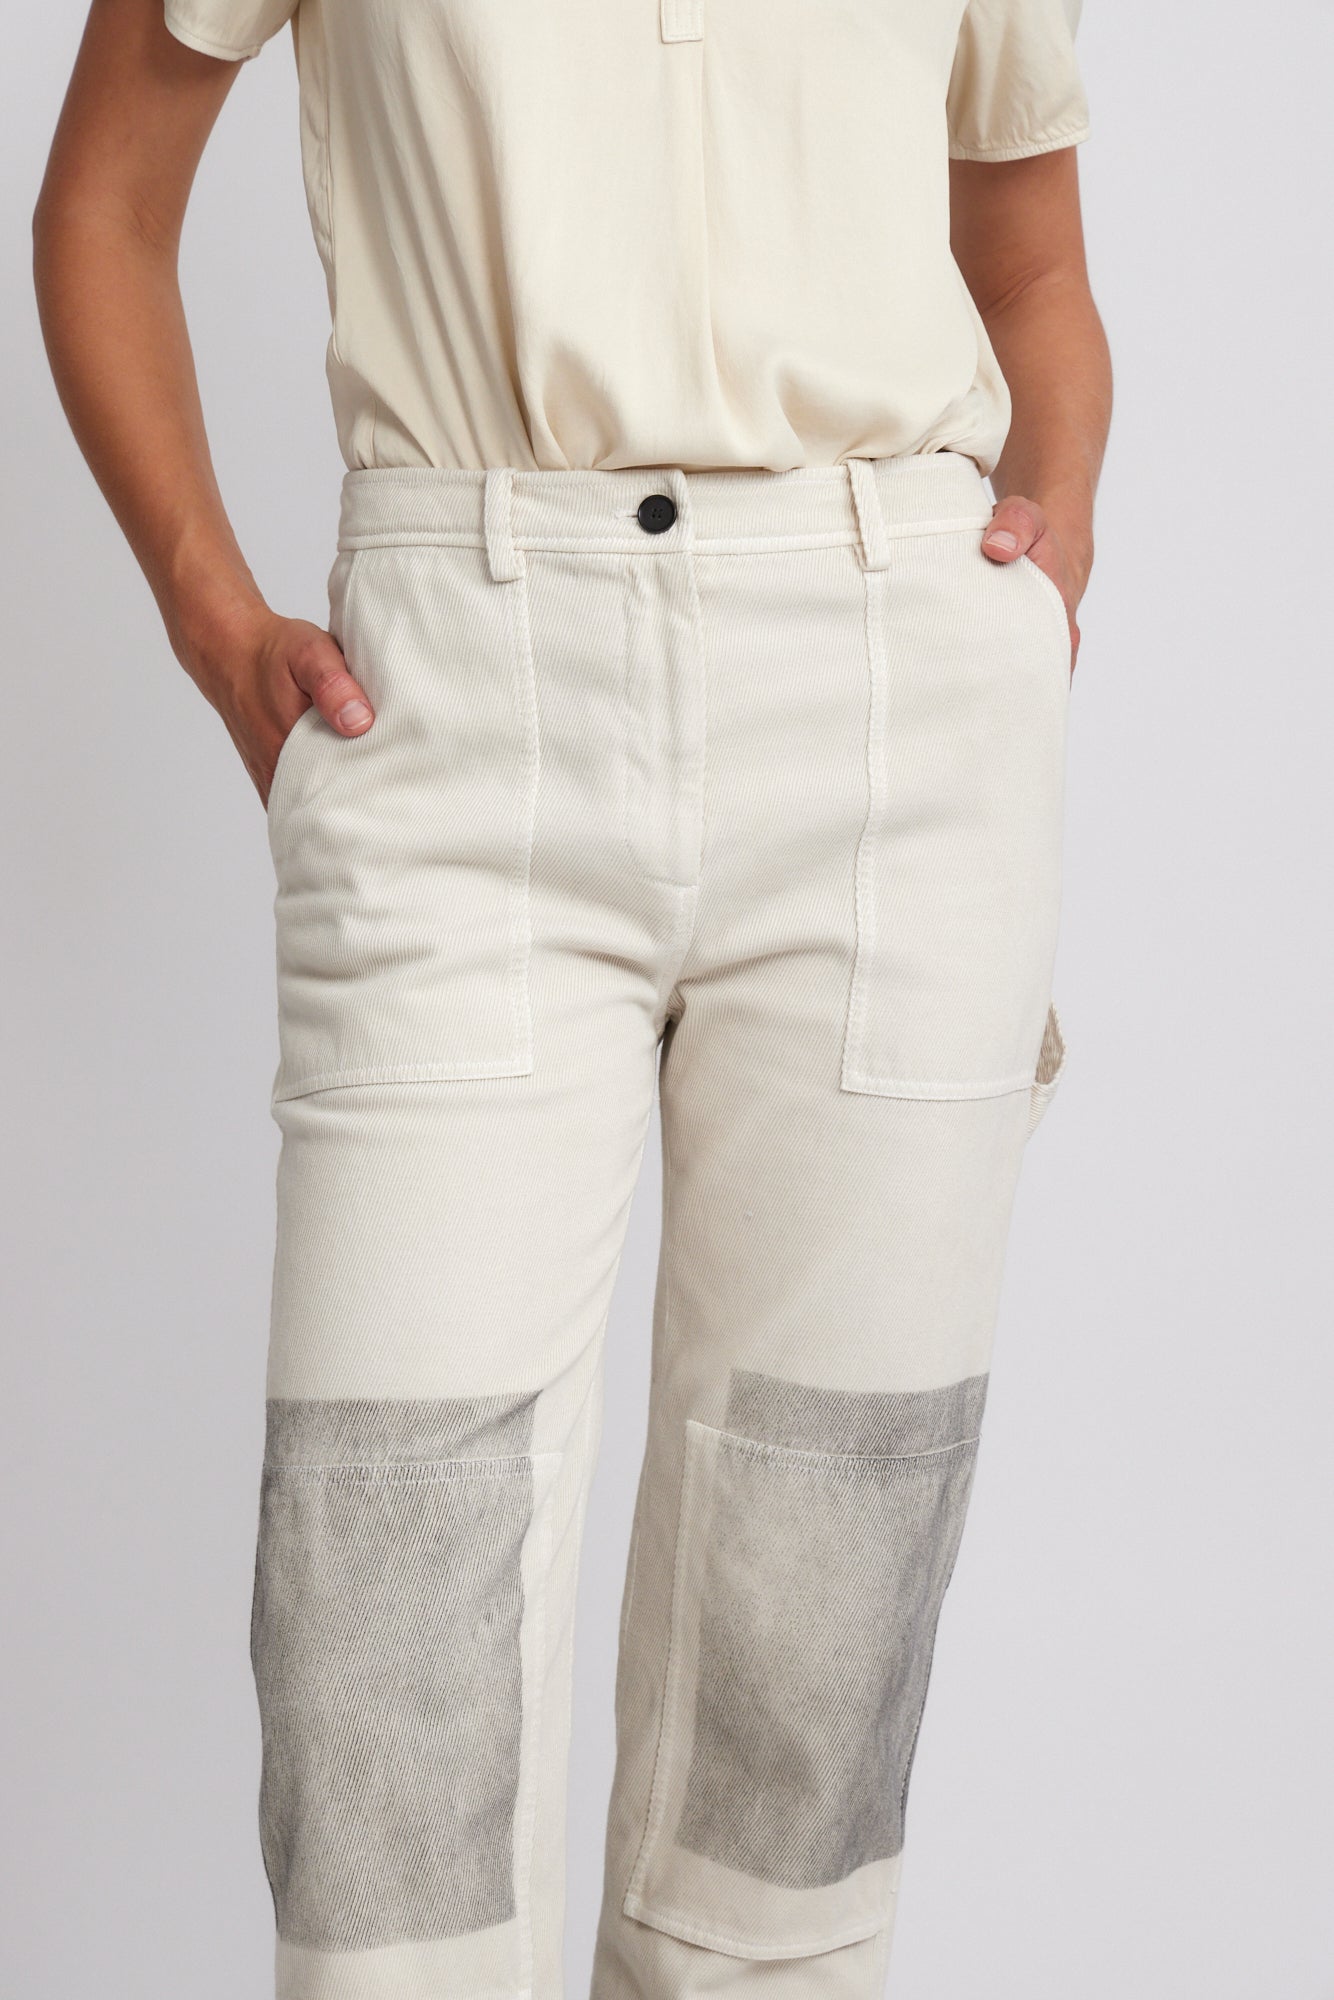 Ivory Black Paint Faille Work Pant Front Close-Up View